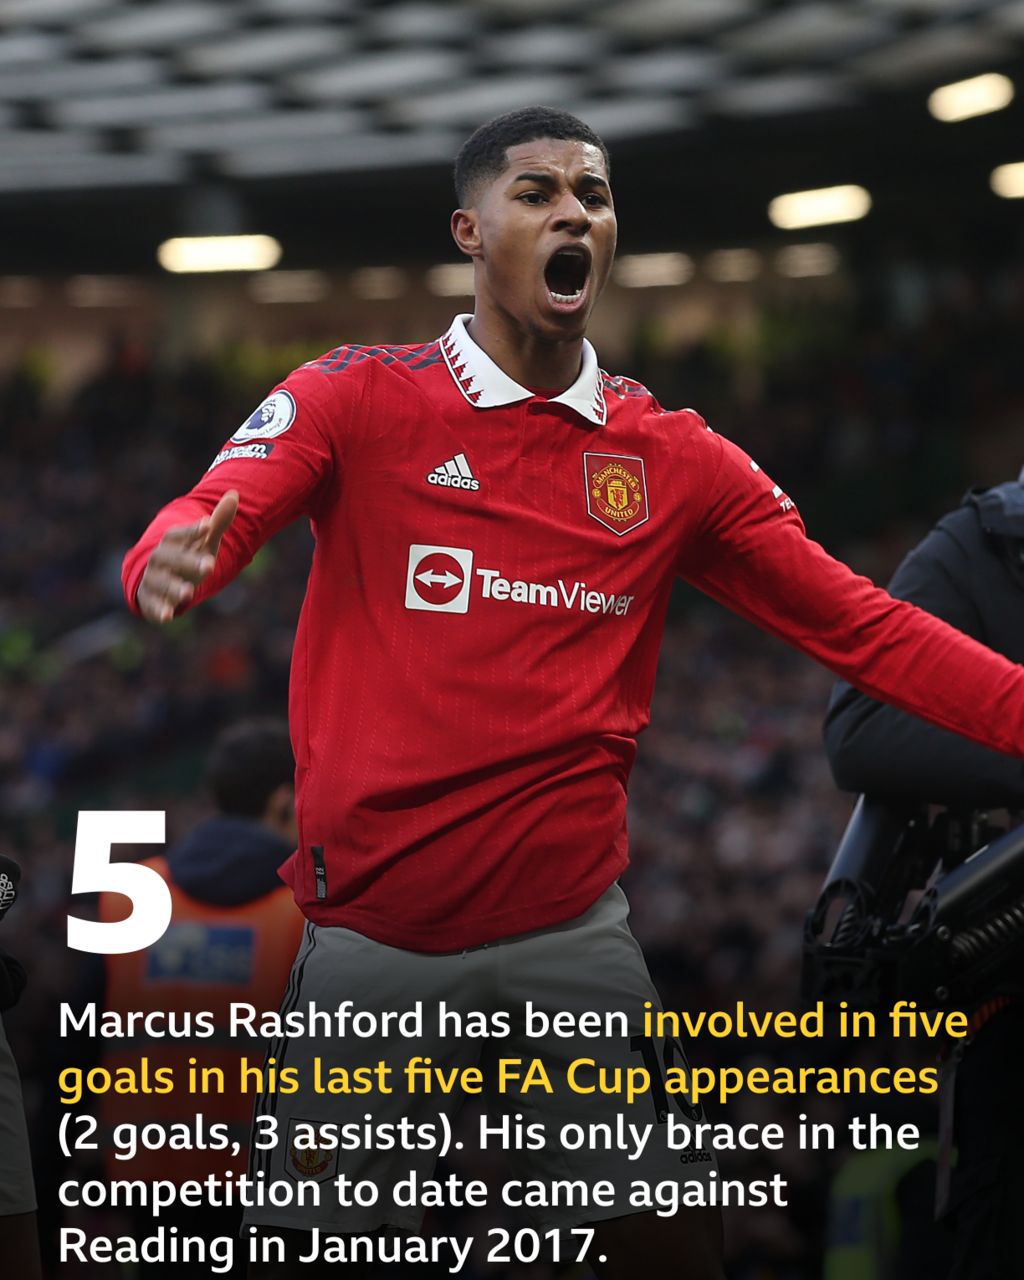 Stats graphic: Man Utd’s Marcus Rashford has been involved in five goals in his last five FA Cup appearances (2 goals, 3 assists). His only brace in the competition to date came against Reading in January 2017.